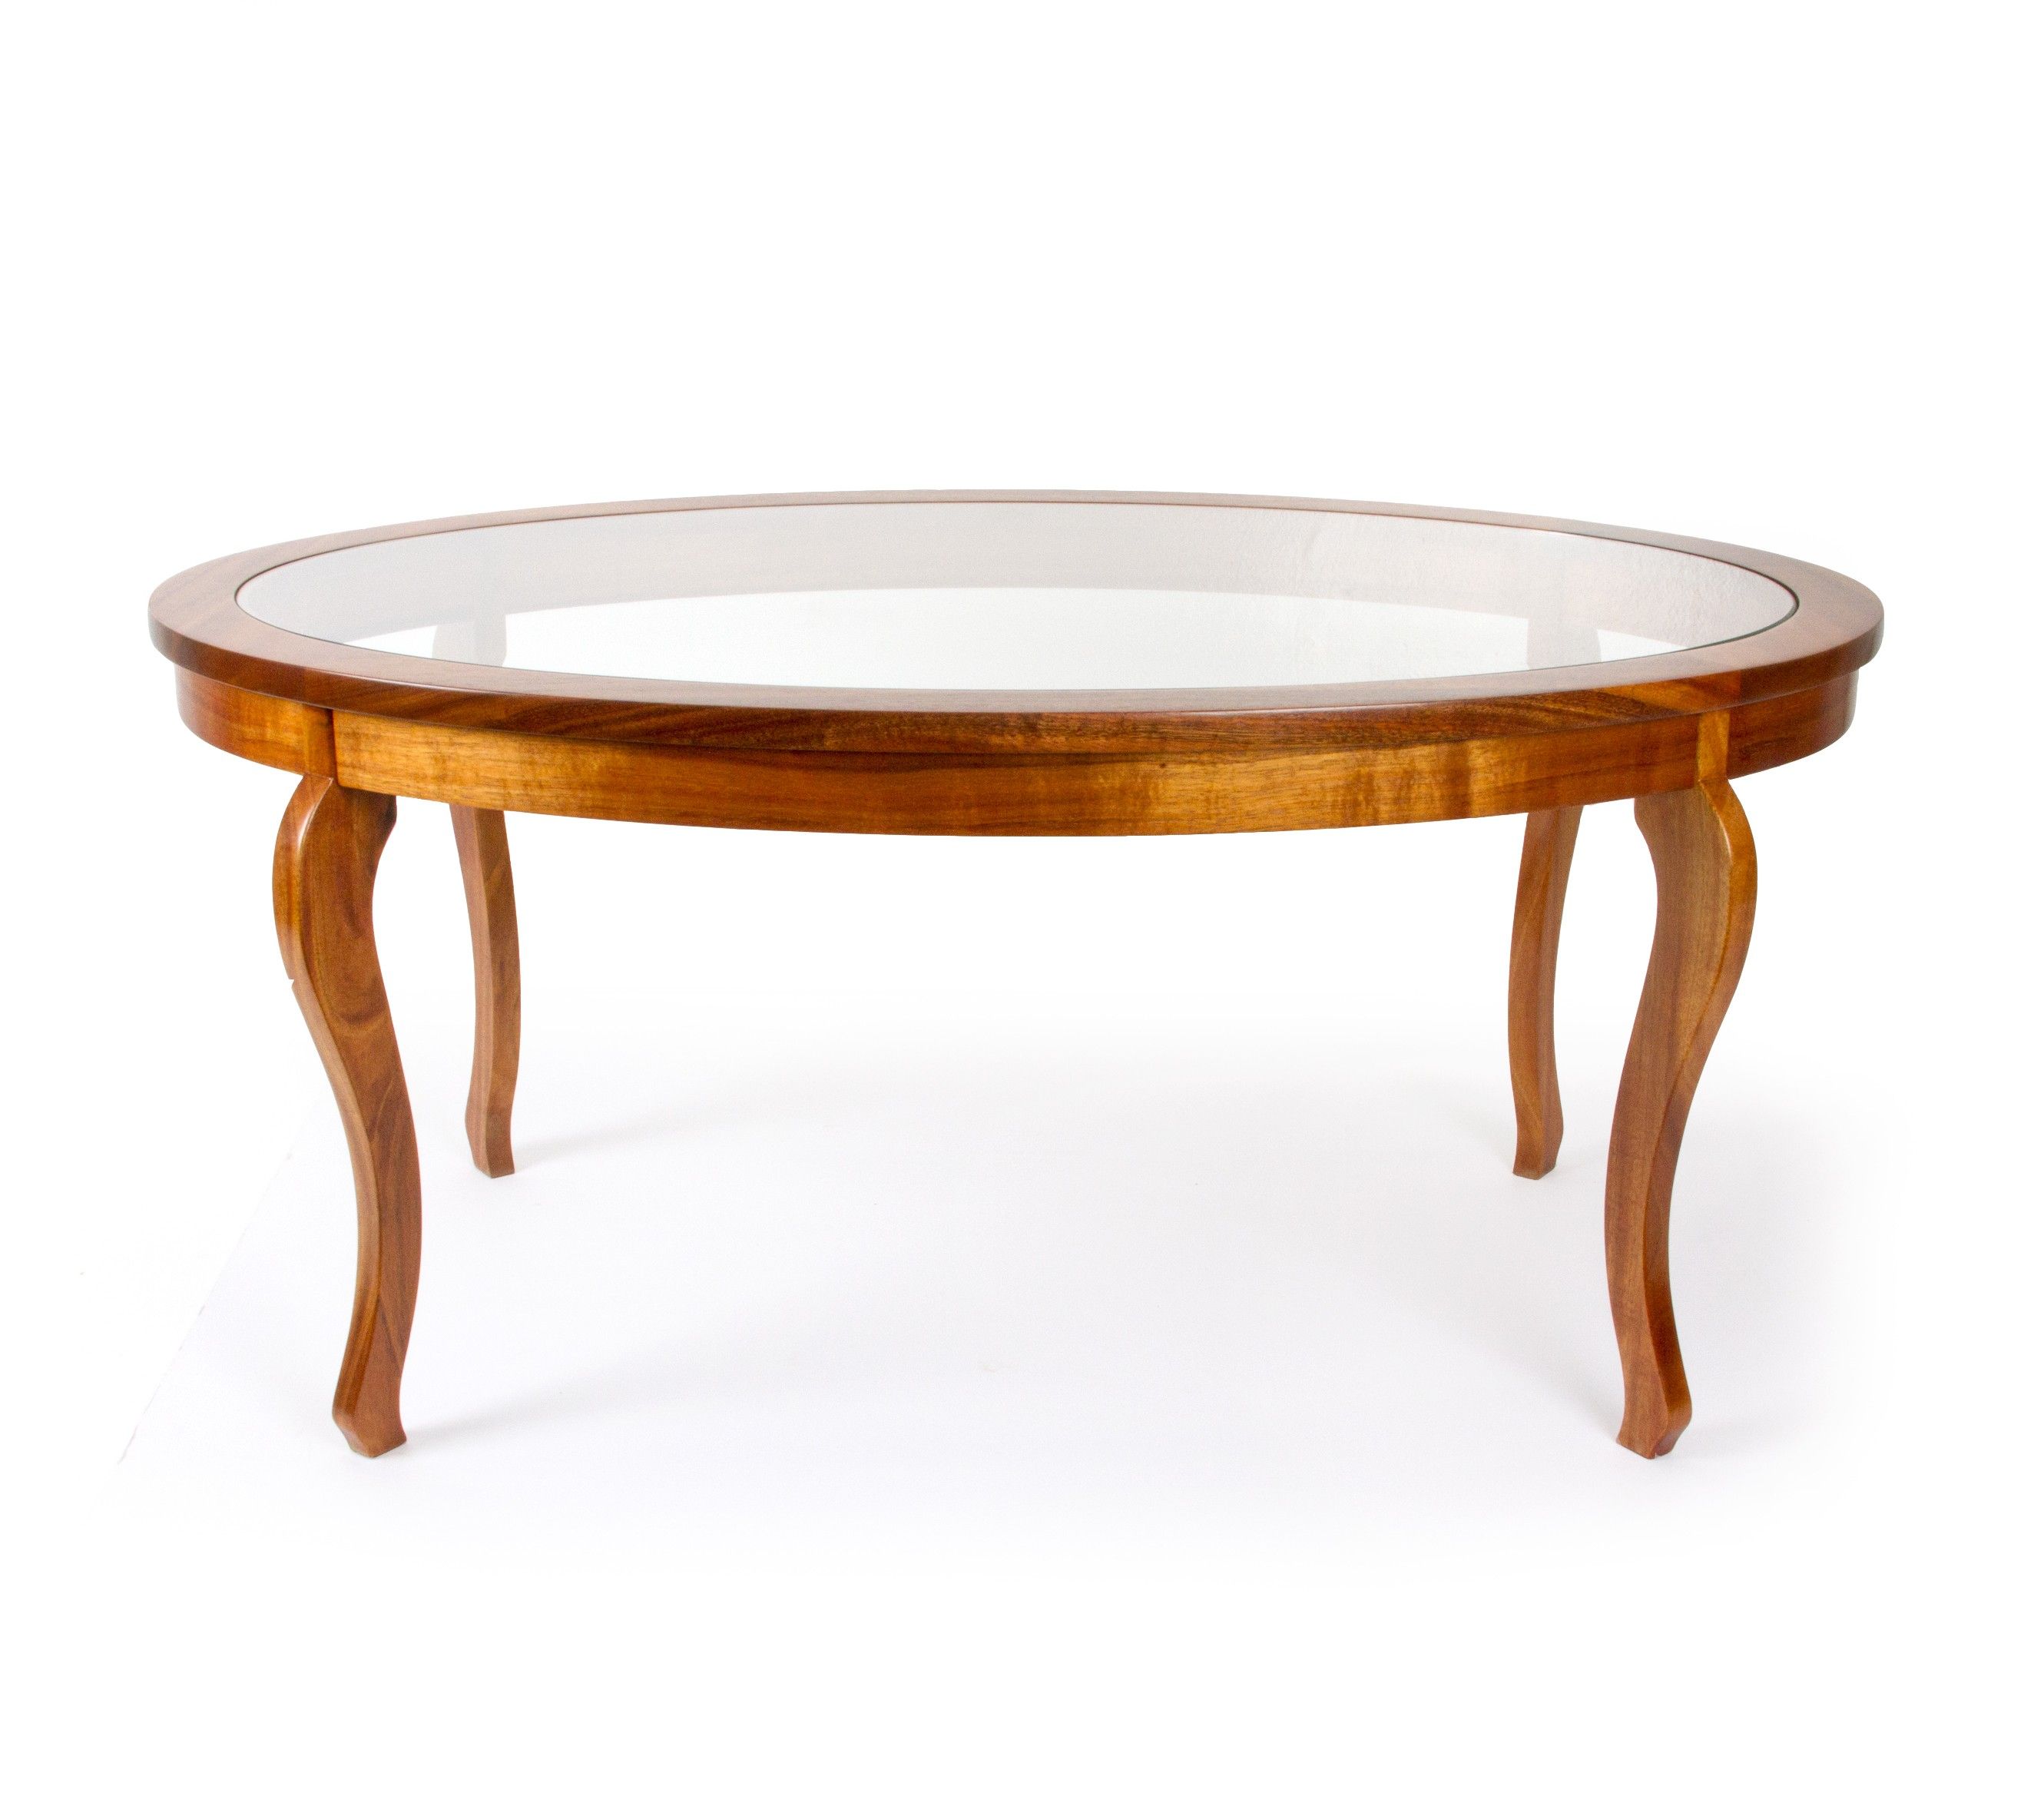 Oval Glass Top Coffee Tables Paul Laszlo For Brown Saltman Round Coffee Table In Mahogany Model 145  (View 10 of 10)